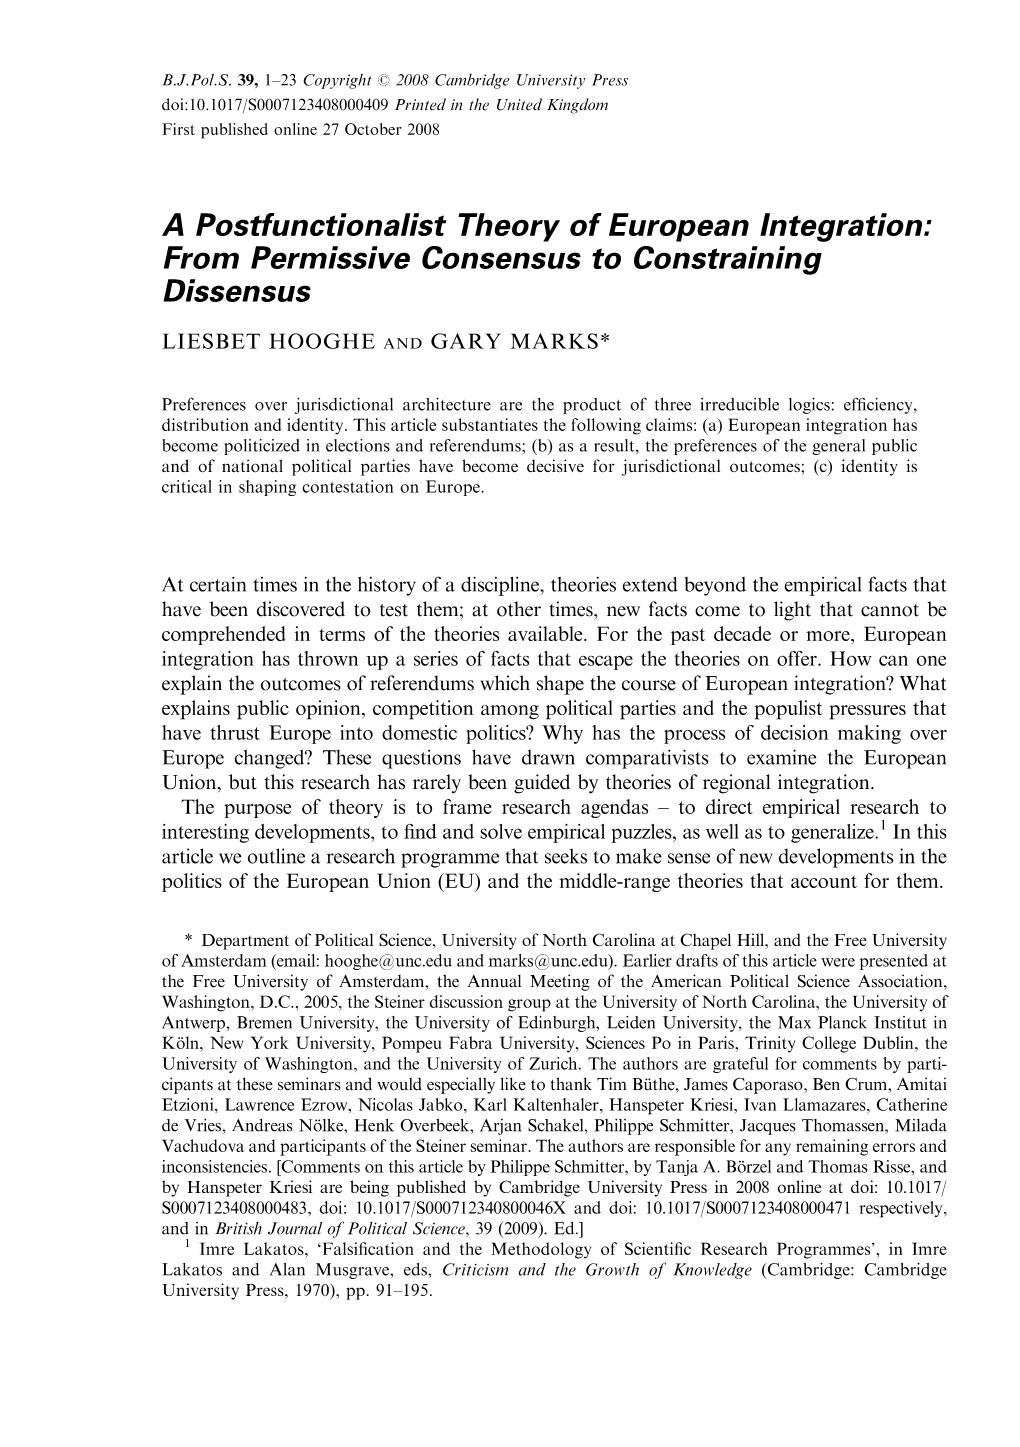 A Postfunctionalist Theory of European Integration: from Permissive Consensus to Constraining Dissensus